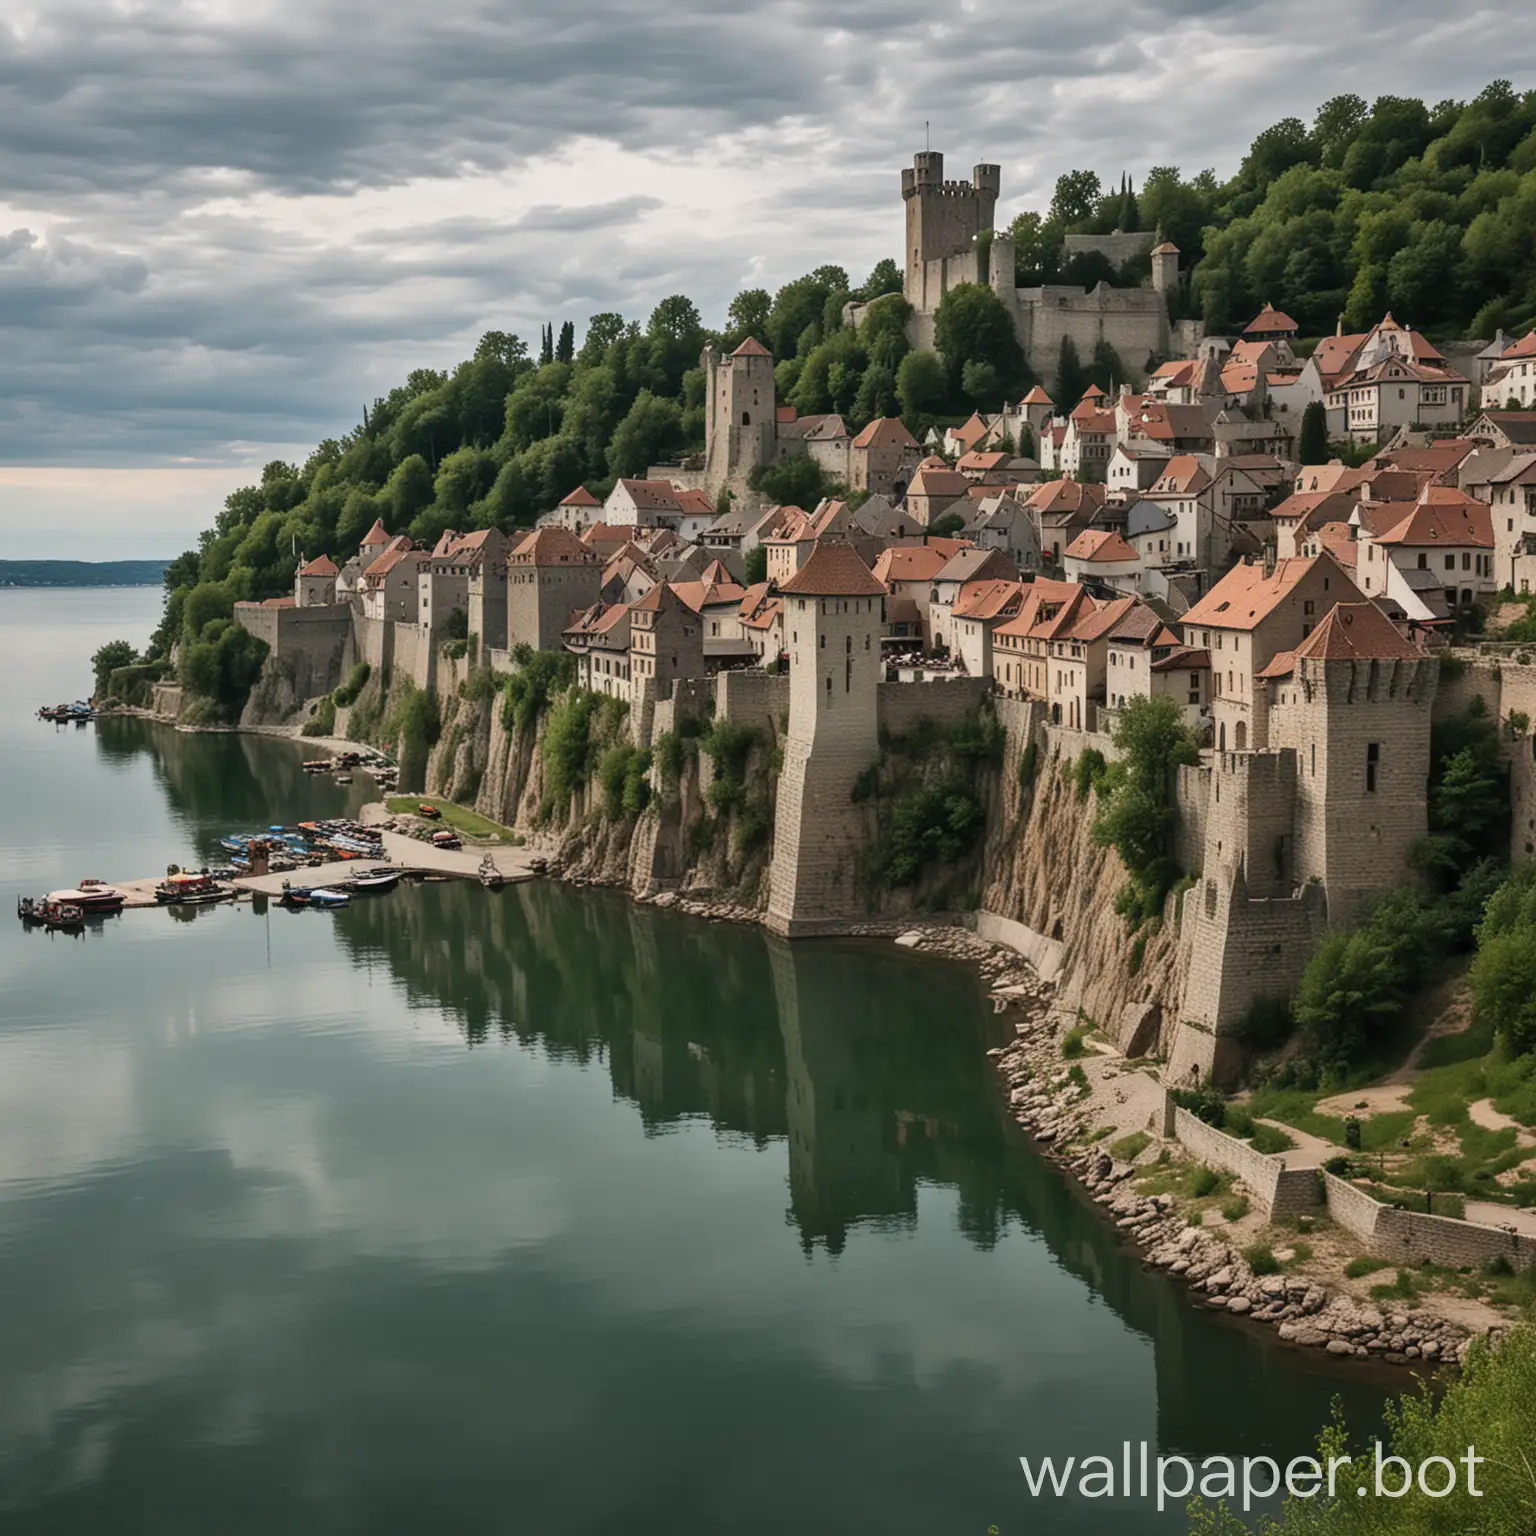 medieval walled town on the shore of a great lake